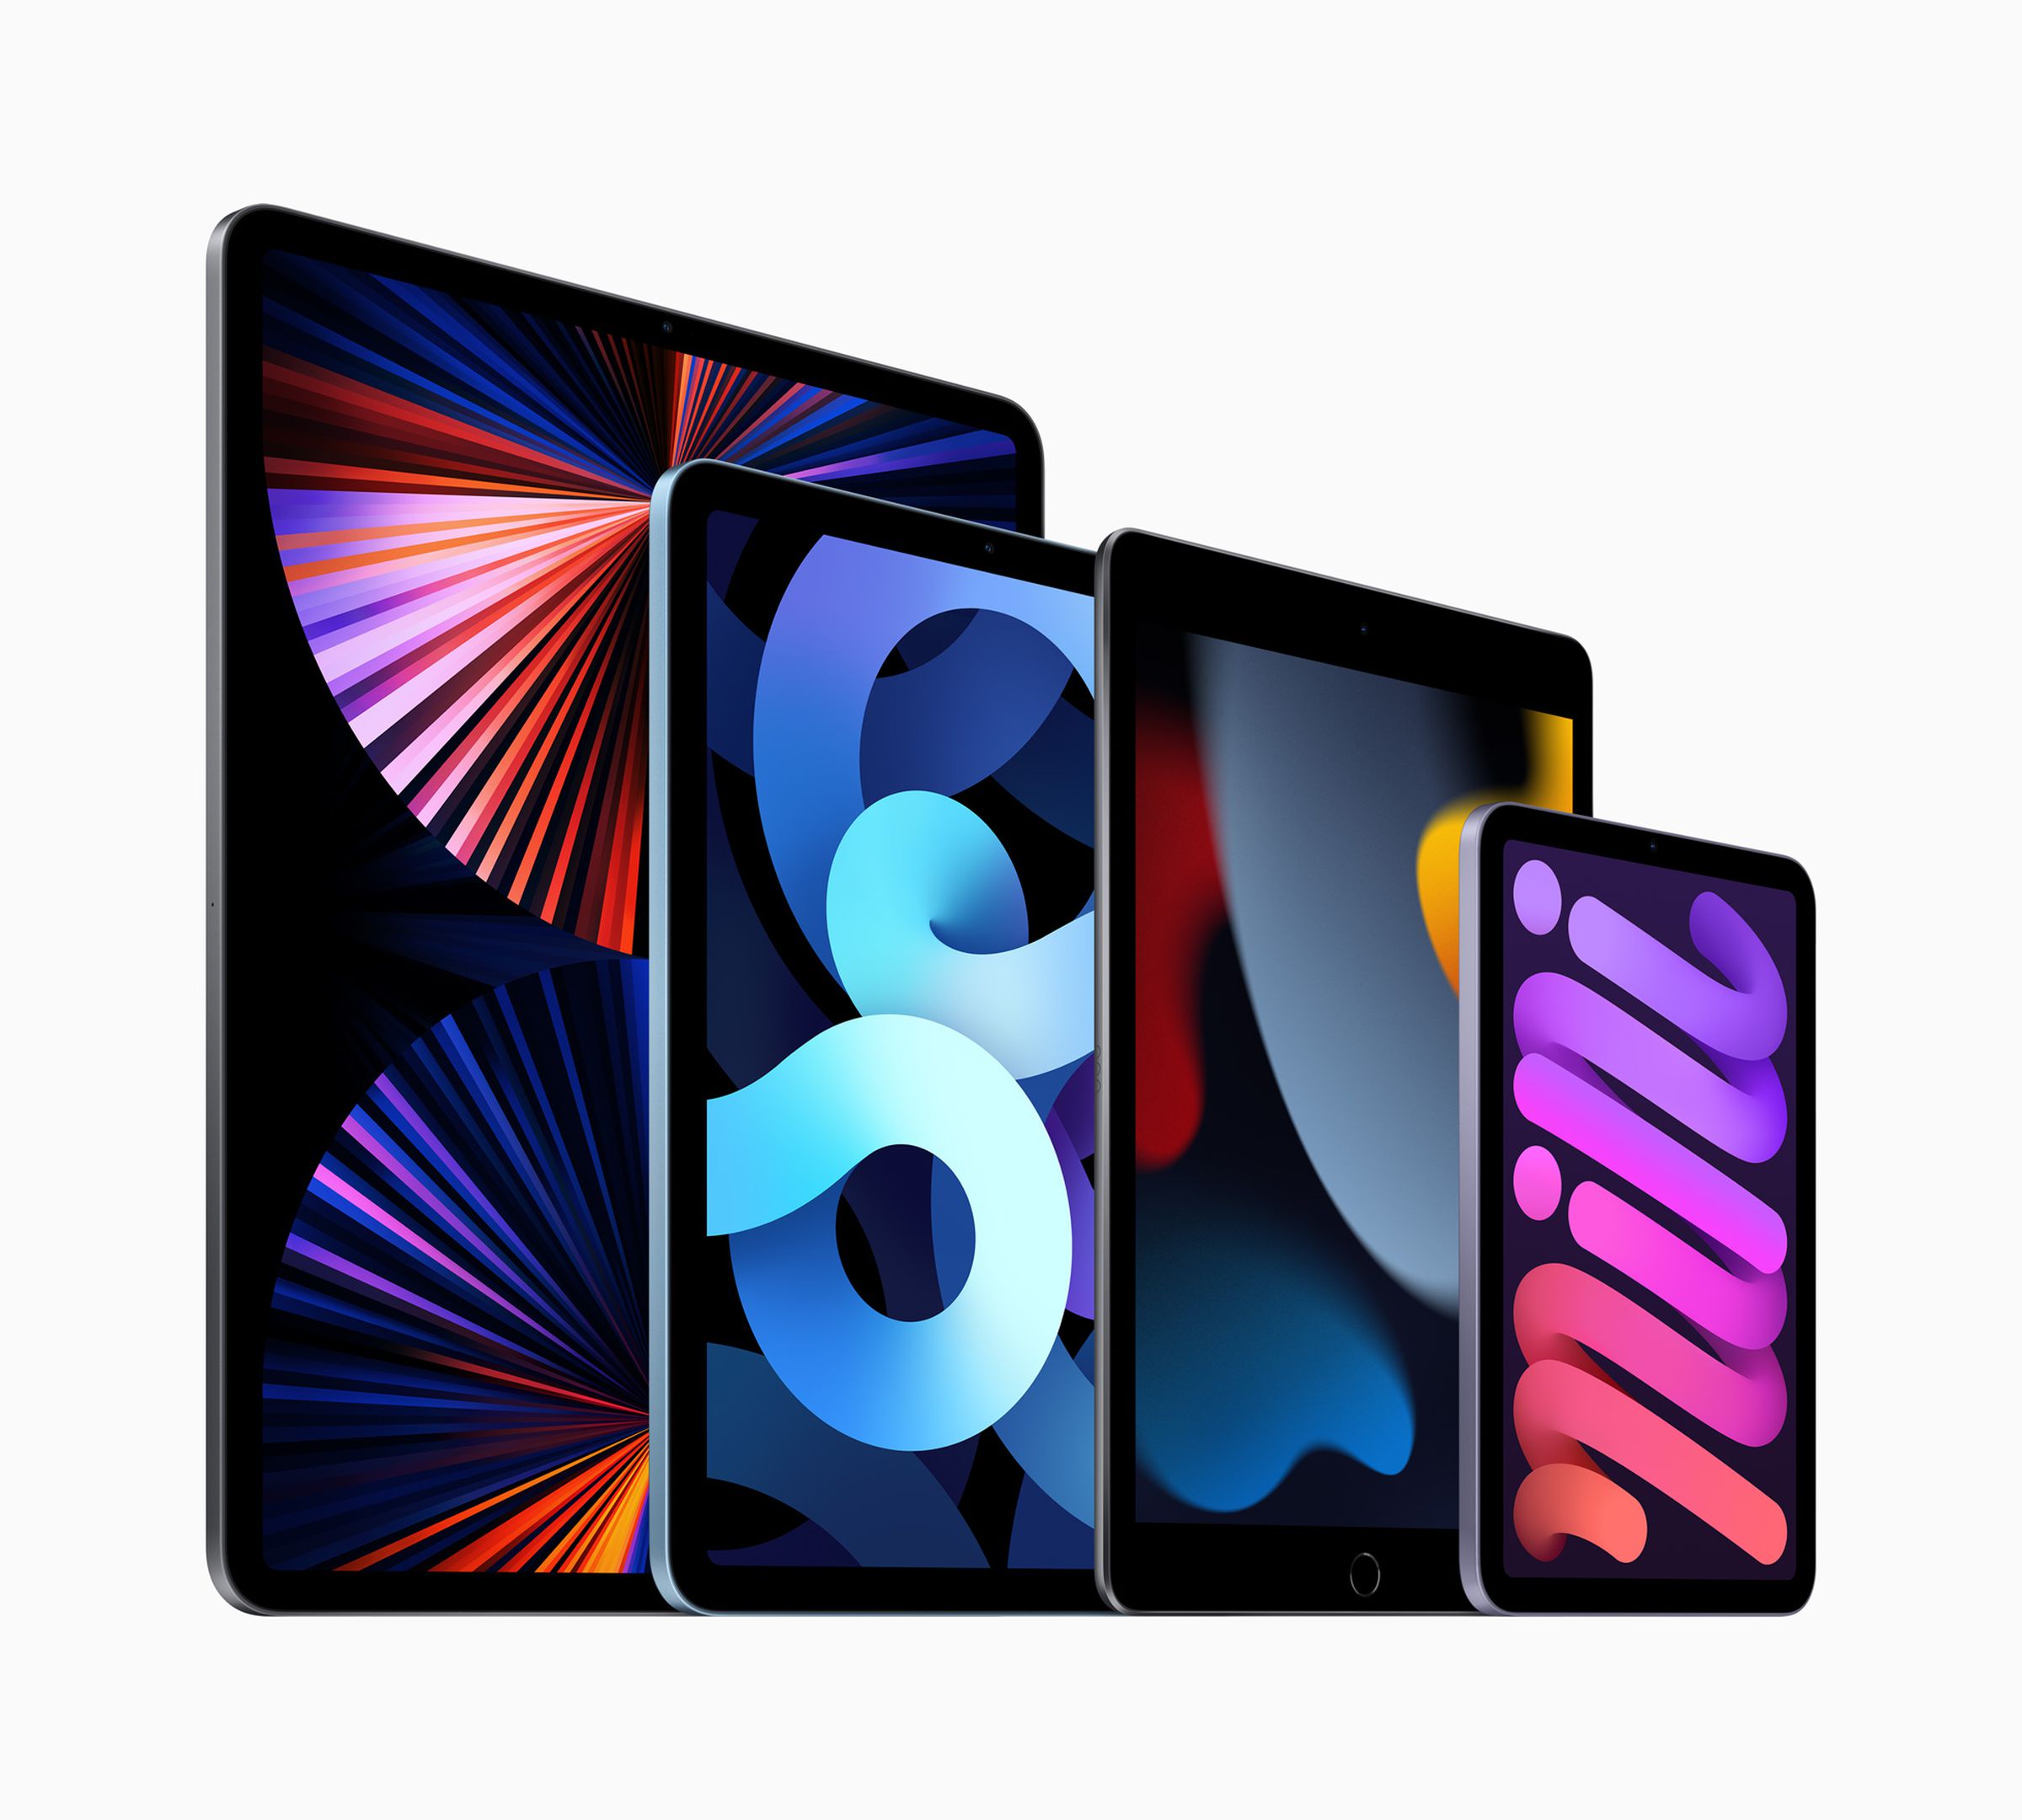 The 2021 iPad (second from the right) remains Apple’s most affordable tablet.